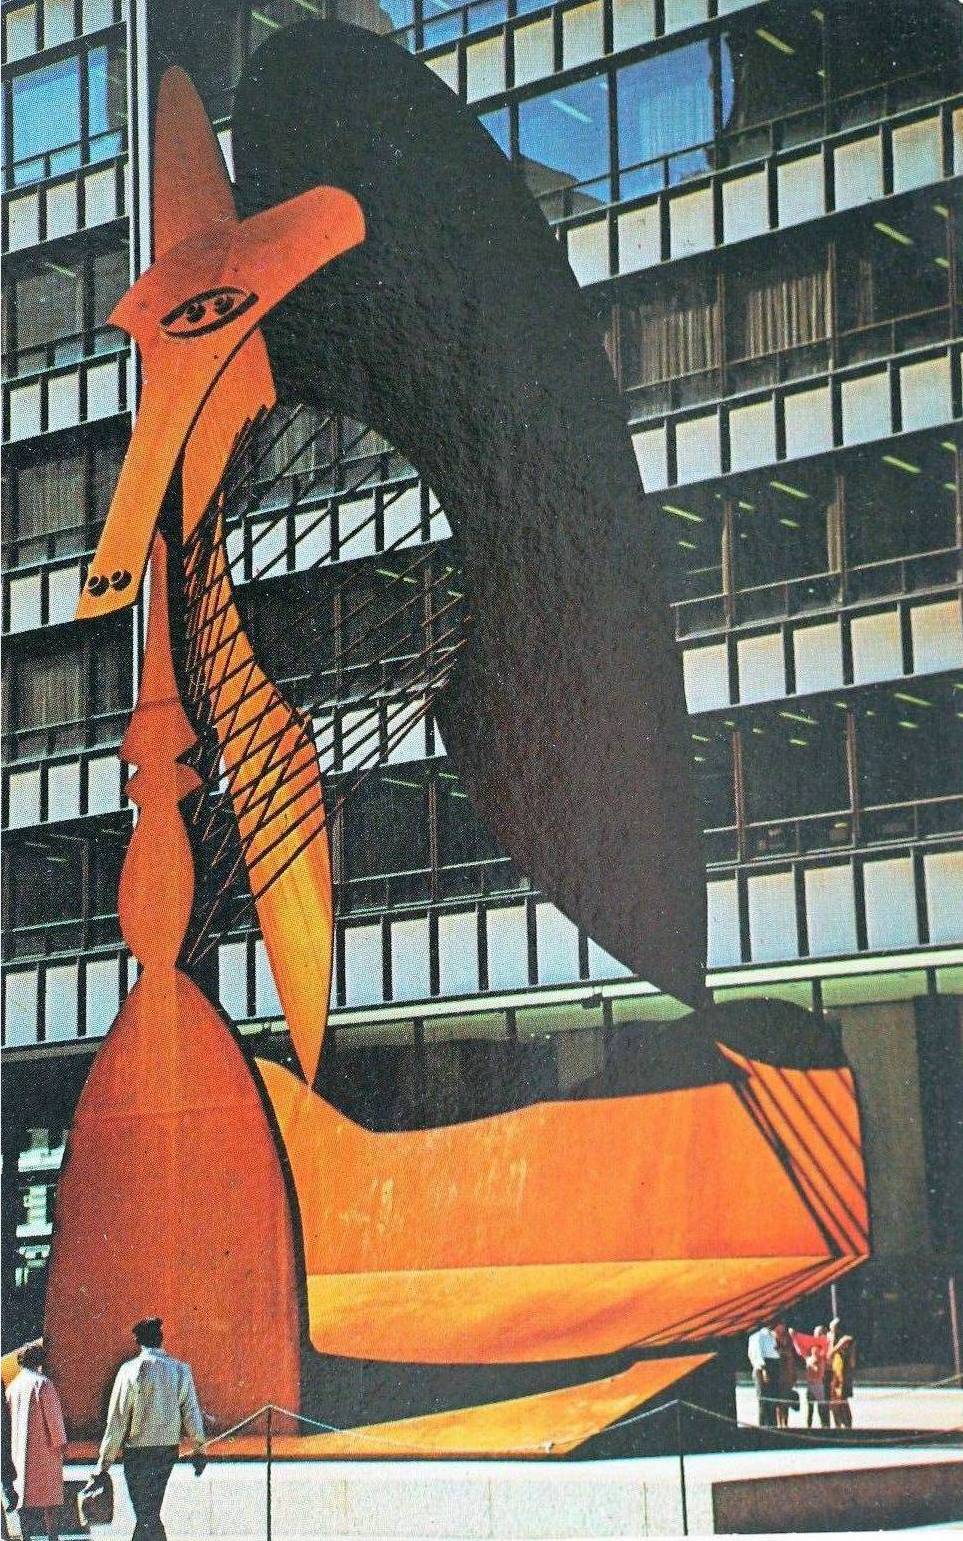 POSTCARD - CHICAGO - CHICAGO'S PICASSO - CIVIC CENTER PLAZA - 50 W WASHINGTON - BUILDING OPENED IN 1965 - SCULPTURE ADDED IN THE YEAR OF THIS CARD - THE COR-TEN STEEL USED GRADUALLY WEATHERS TO A PURPLISH DEEP BROWN - 1967